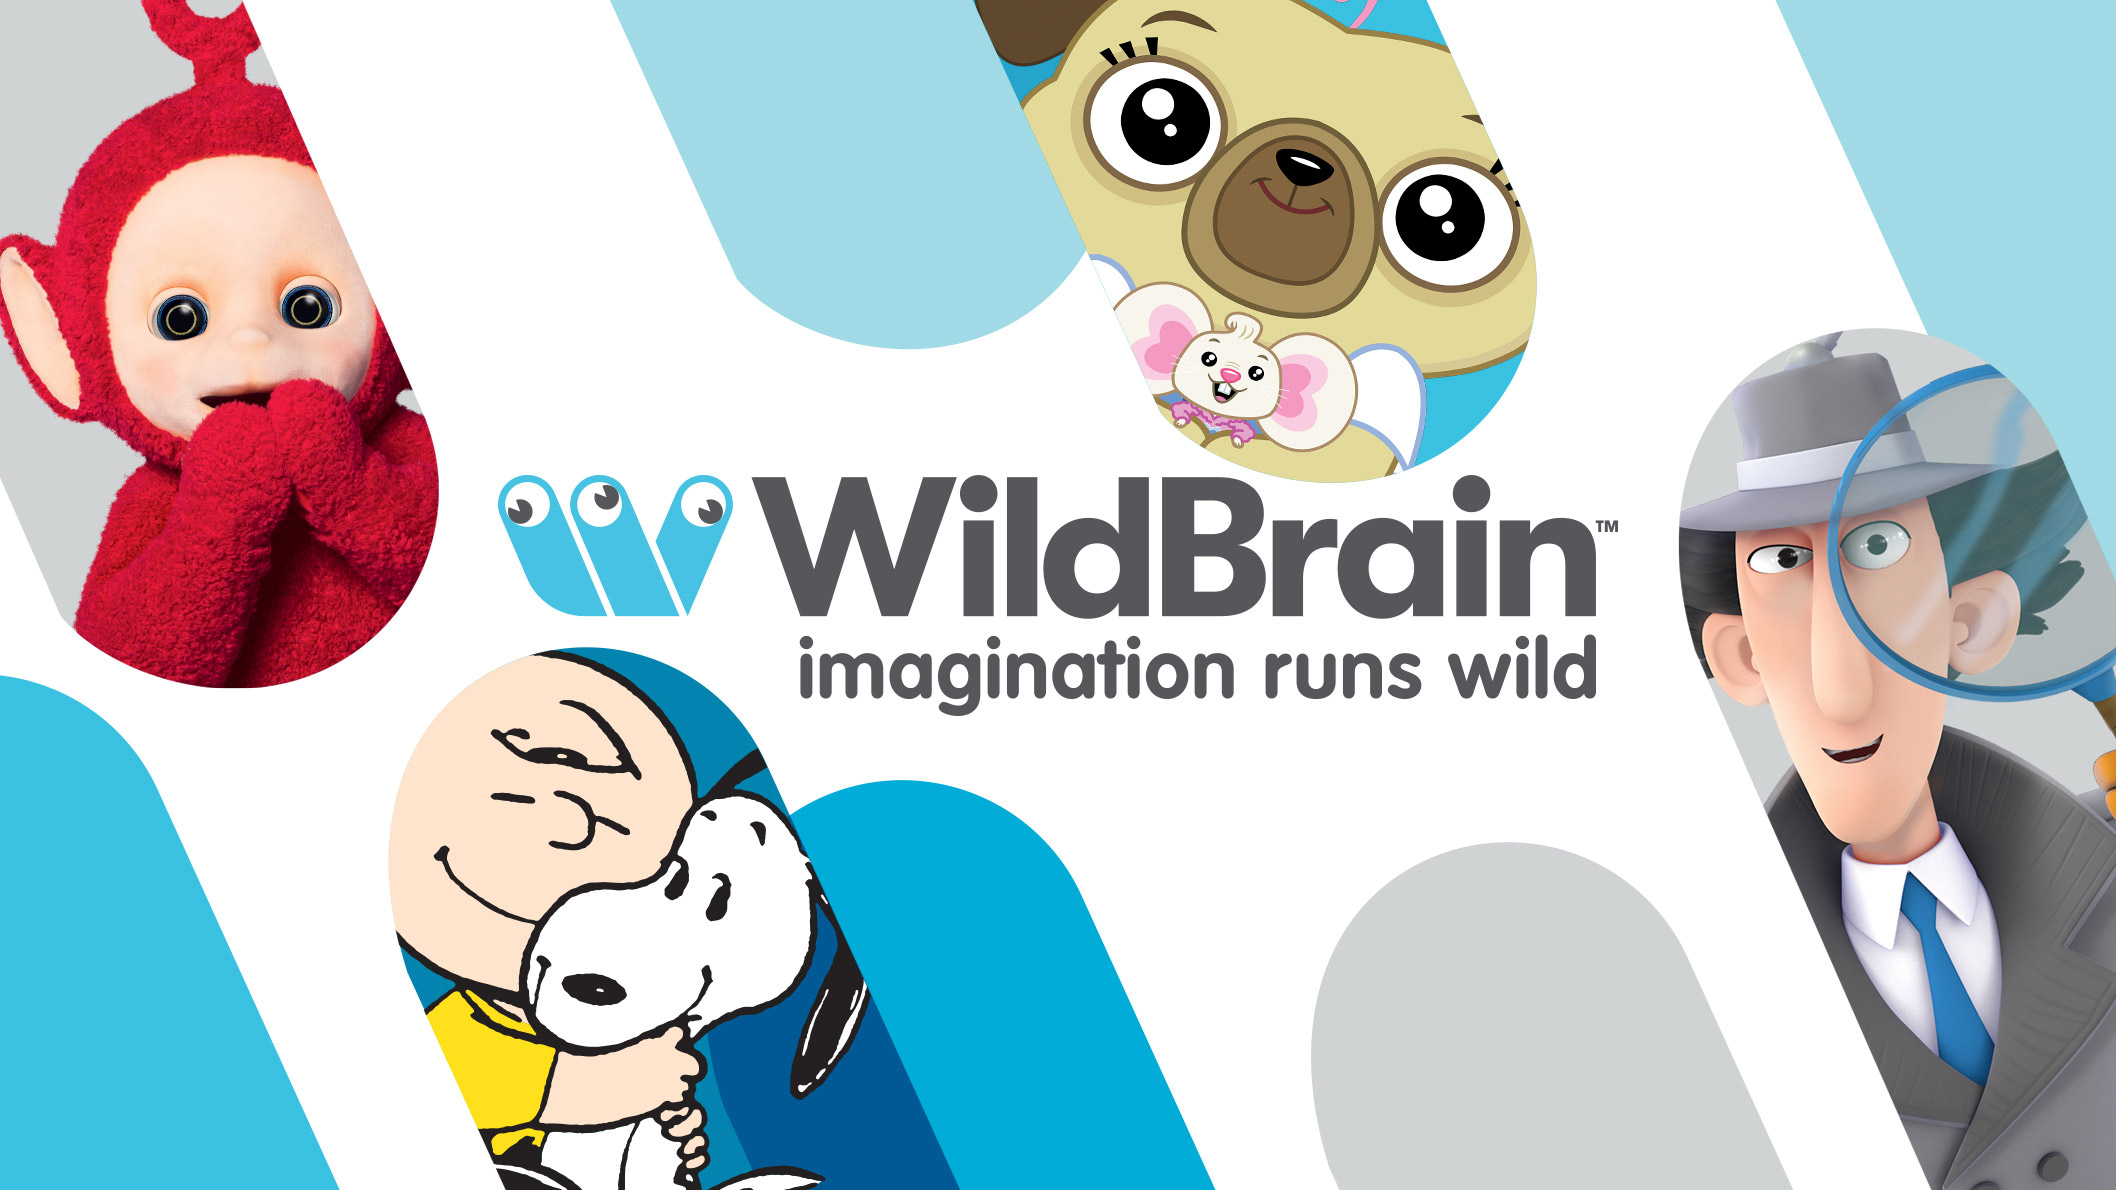 A white background with the WildBrain logo and a text that says Imagination Runs Wild, in the middle. There are blue shapes sticking out from the corners of the image, with different characters in each blue shape.